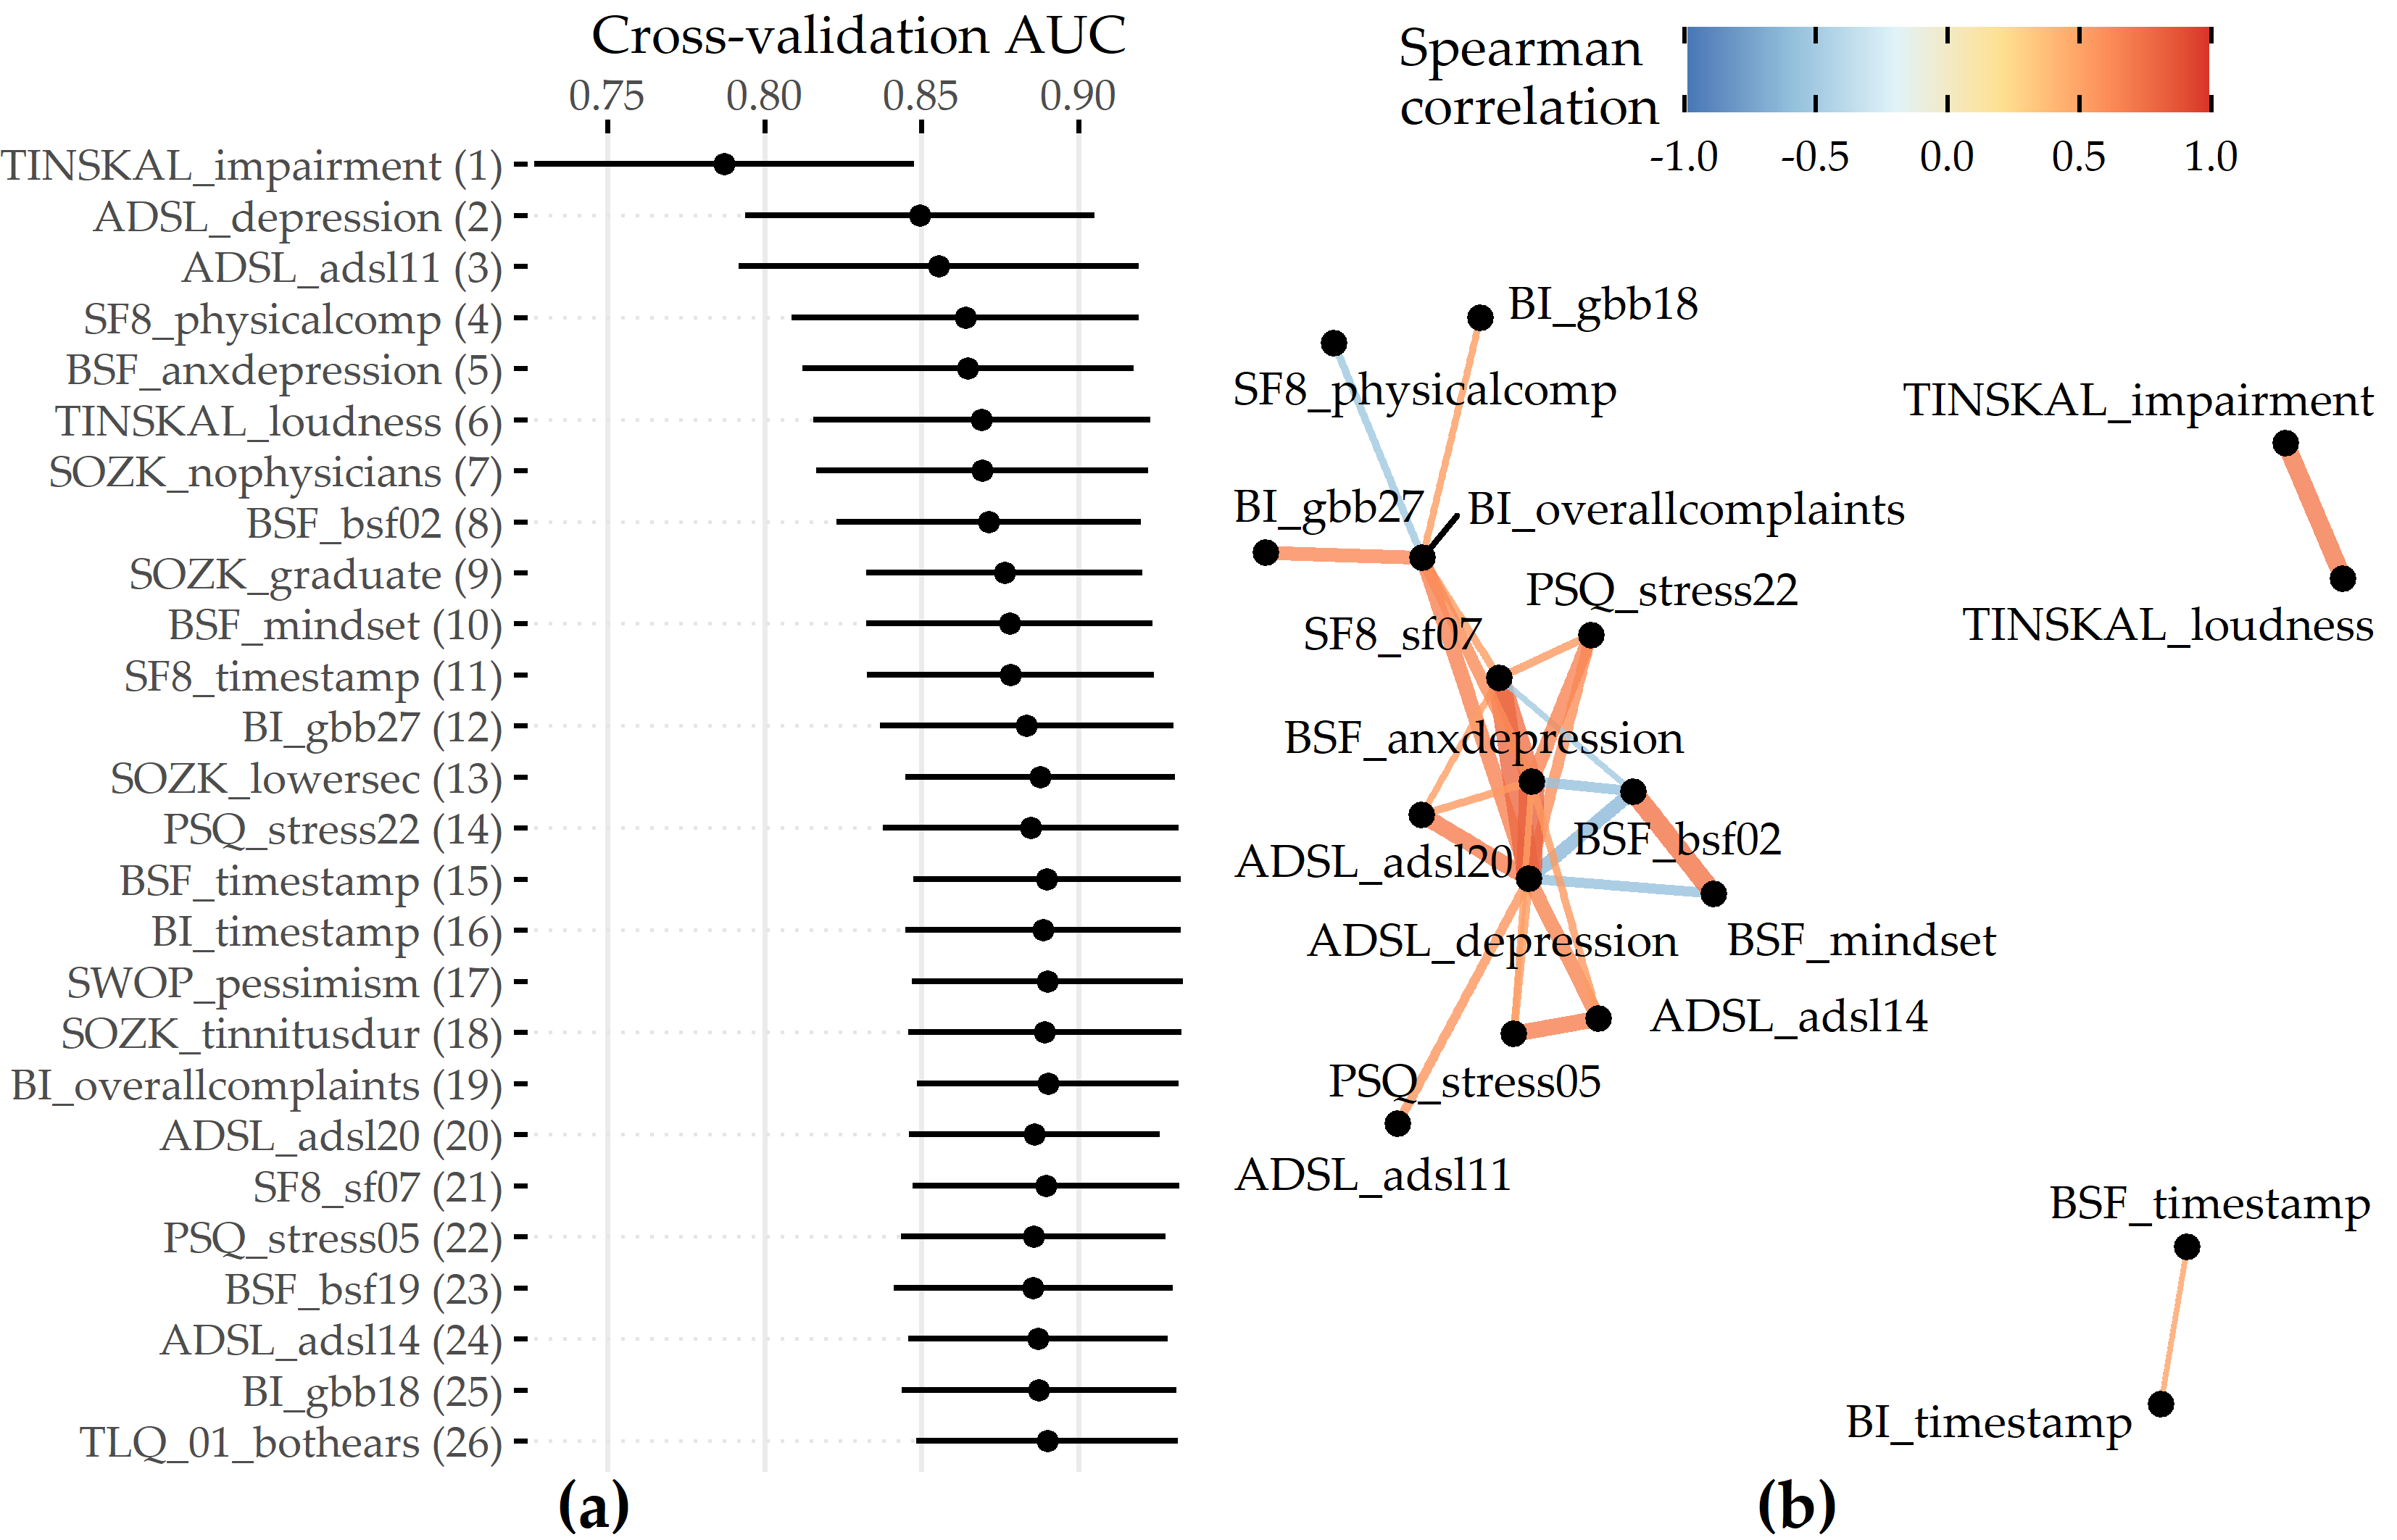 Cumulative feature contribution and correlation network. (a) Cross-validation AUC (average ± standard deviation) of a GBT model trained on the feature subset comprising the predictors denoted on the y-axis up to that iteration. The ordering of features is according to the mean absolute SHAP value (cf. Figure 8.7 (a)). (b) Network illustrating 3 groups of features among the 26 selected predictors of the best model with high intra-group correlation (\(|\rho| \geq\) 0.5). Eight predictors (predominantly from SOZK) without any moderate to high pairwise correlation are not shown.